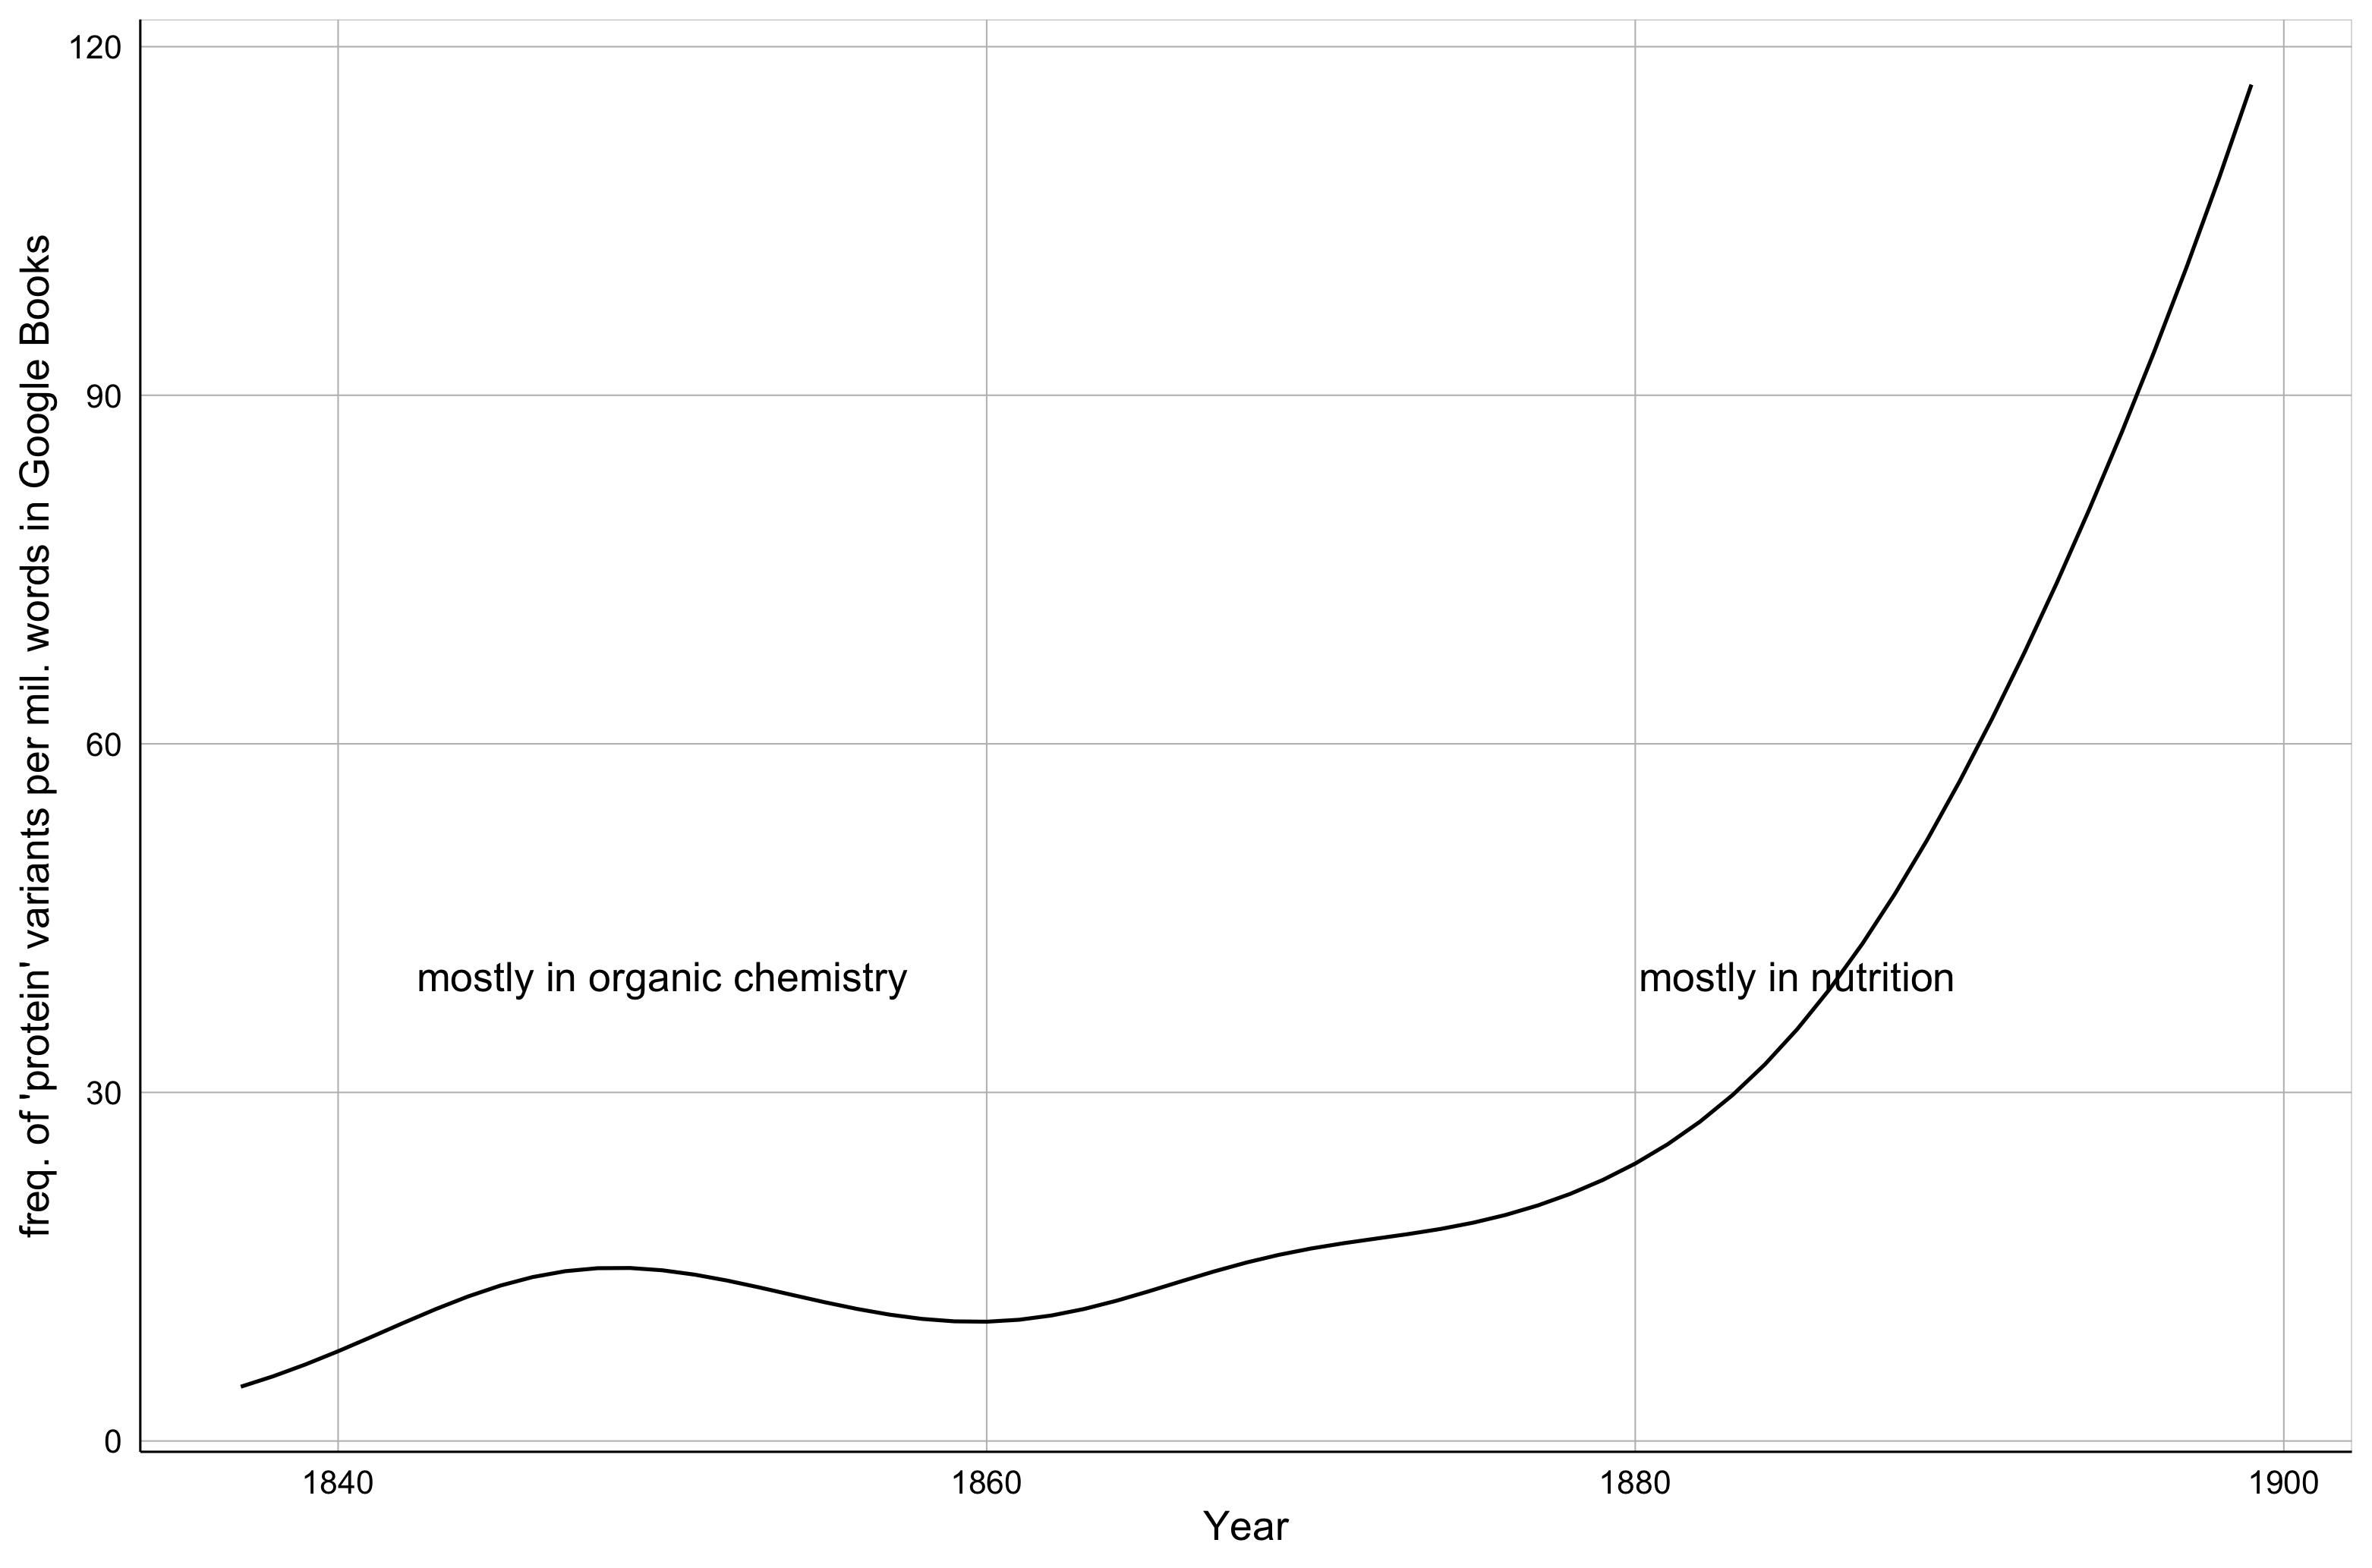 Figure 1. Use of protein and related forms in Google Books by date. Freq of 'protein' variants per mil. words in Google Books (y-axis, 0-120) vs year (x-axis, 1840-1900). Gradual increase from 0-25 between 1840-1880 (usage mostly in organic chemistry), rapid increase to around 120 in 1900 (usage mostly in nutrition)